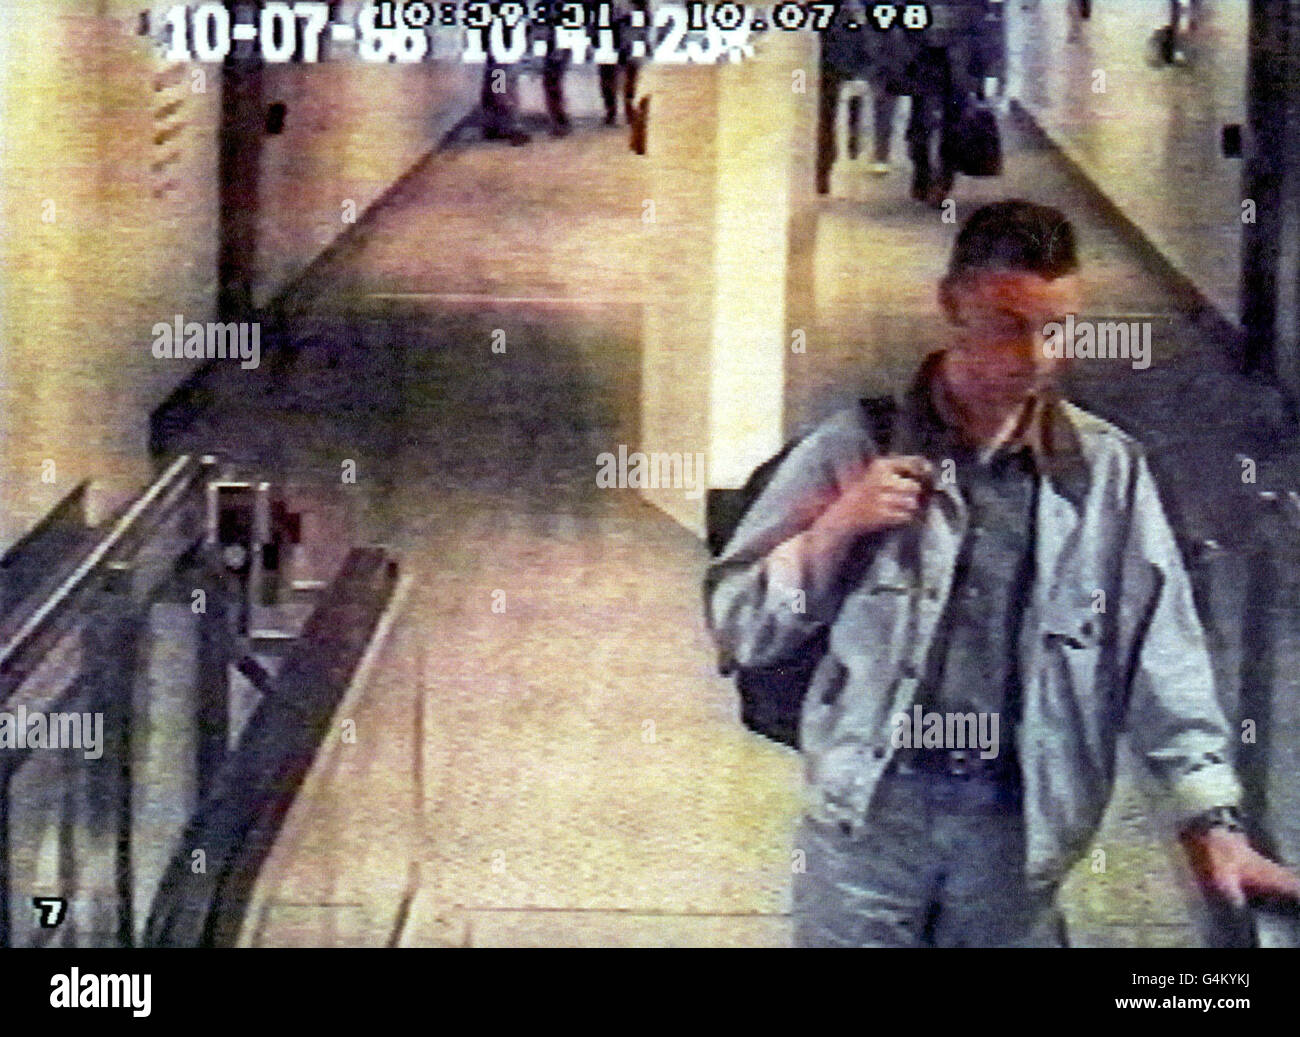 Metroploitan police videograb of Daren Mulholland at Stansted airport on 10/7/98, issued in connection with three university students who have been jailed at the Old Bailey, for taking part in an Irish republican plot to firebomb UK mainland targets. * The plot was intended to scupper the Good Friday agreement. The students planned to use a Semtex high explosive bomb and six incendiary devices to hit targets in the UK. Stock Photo